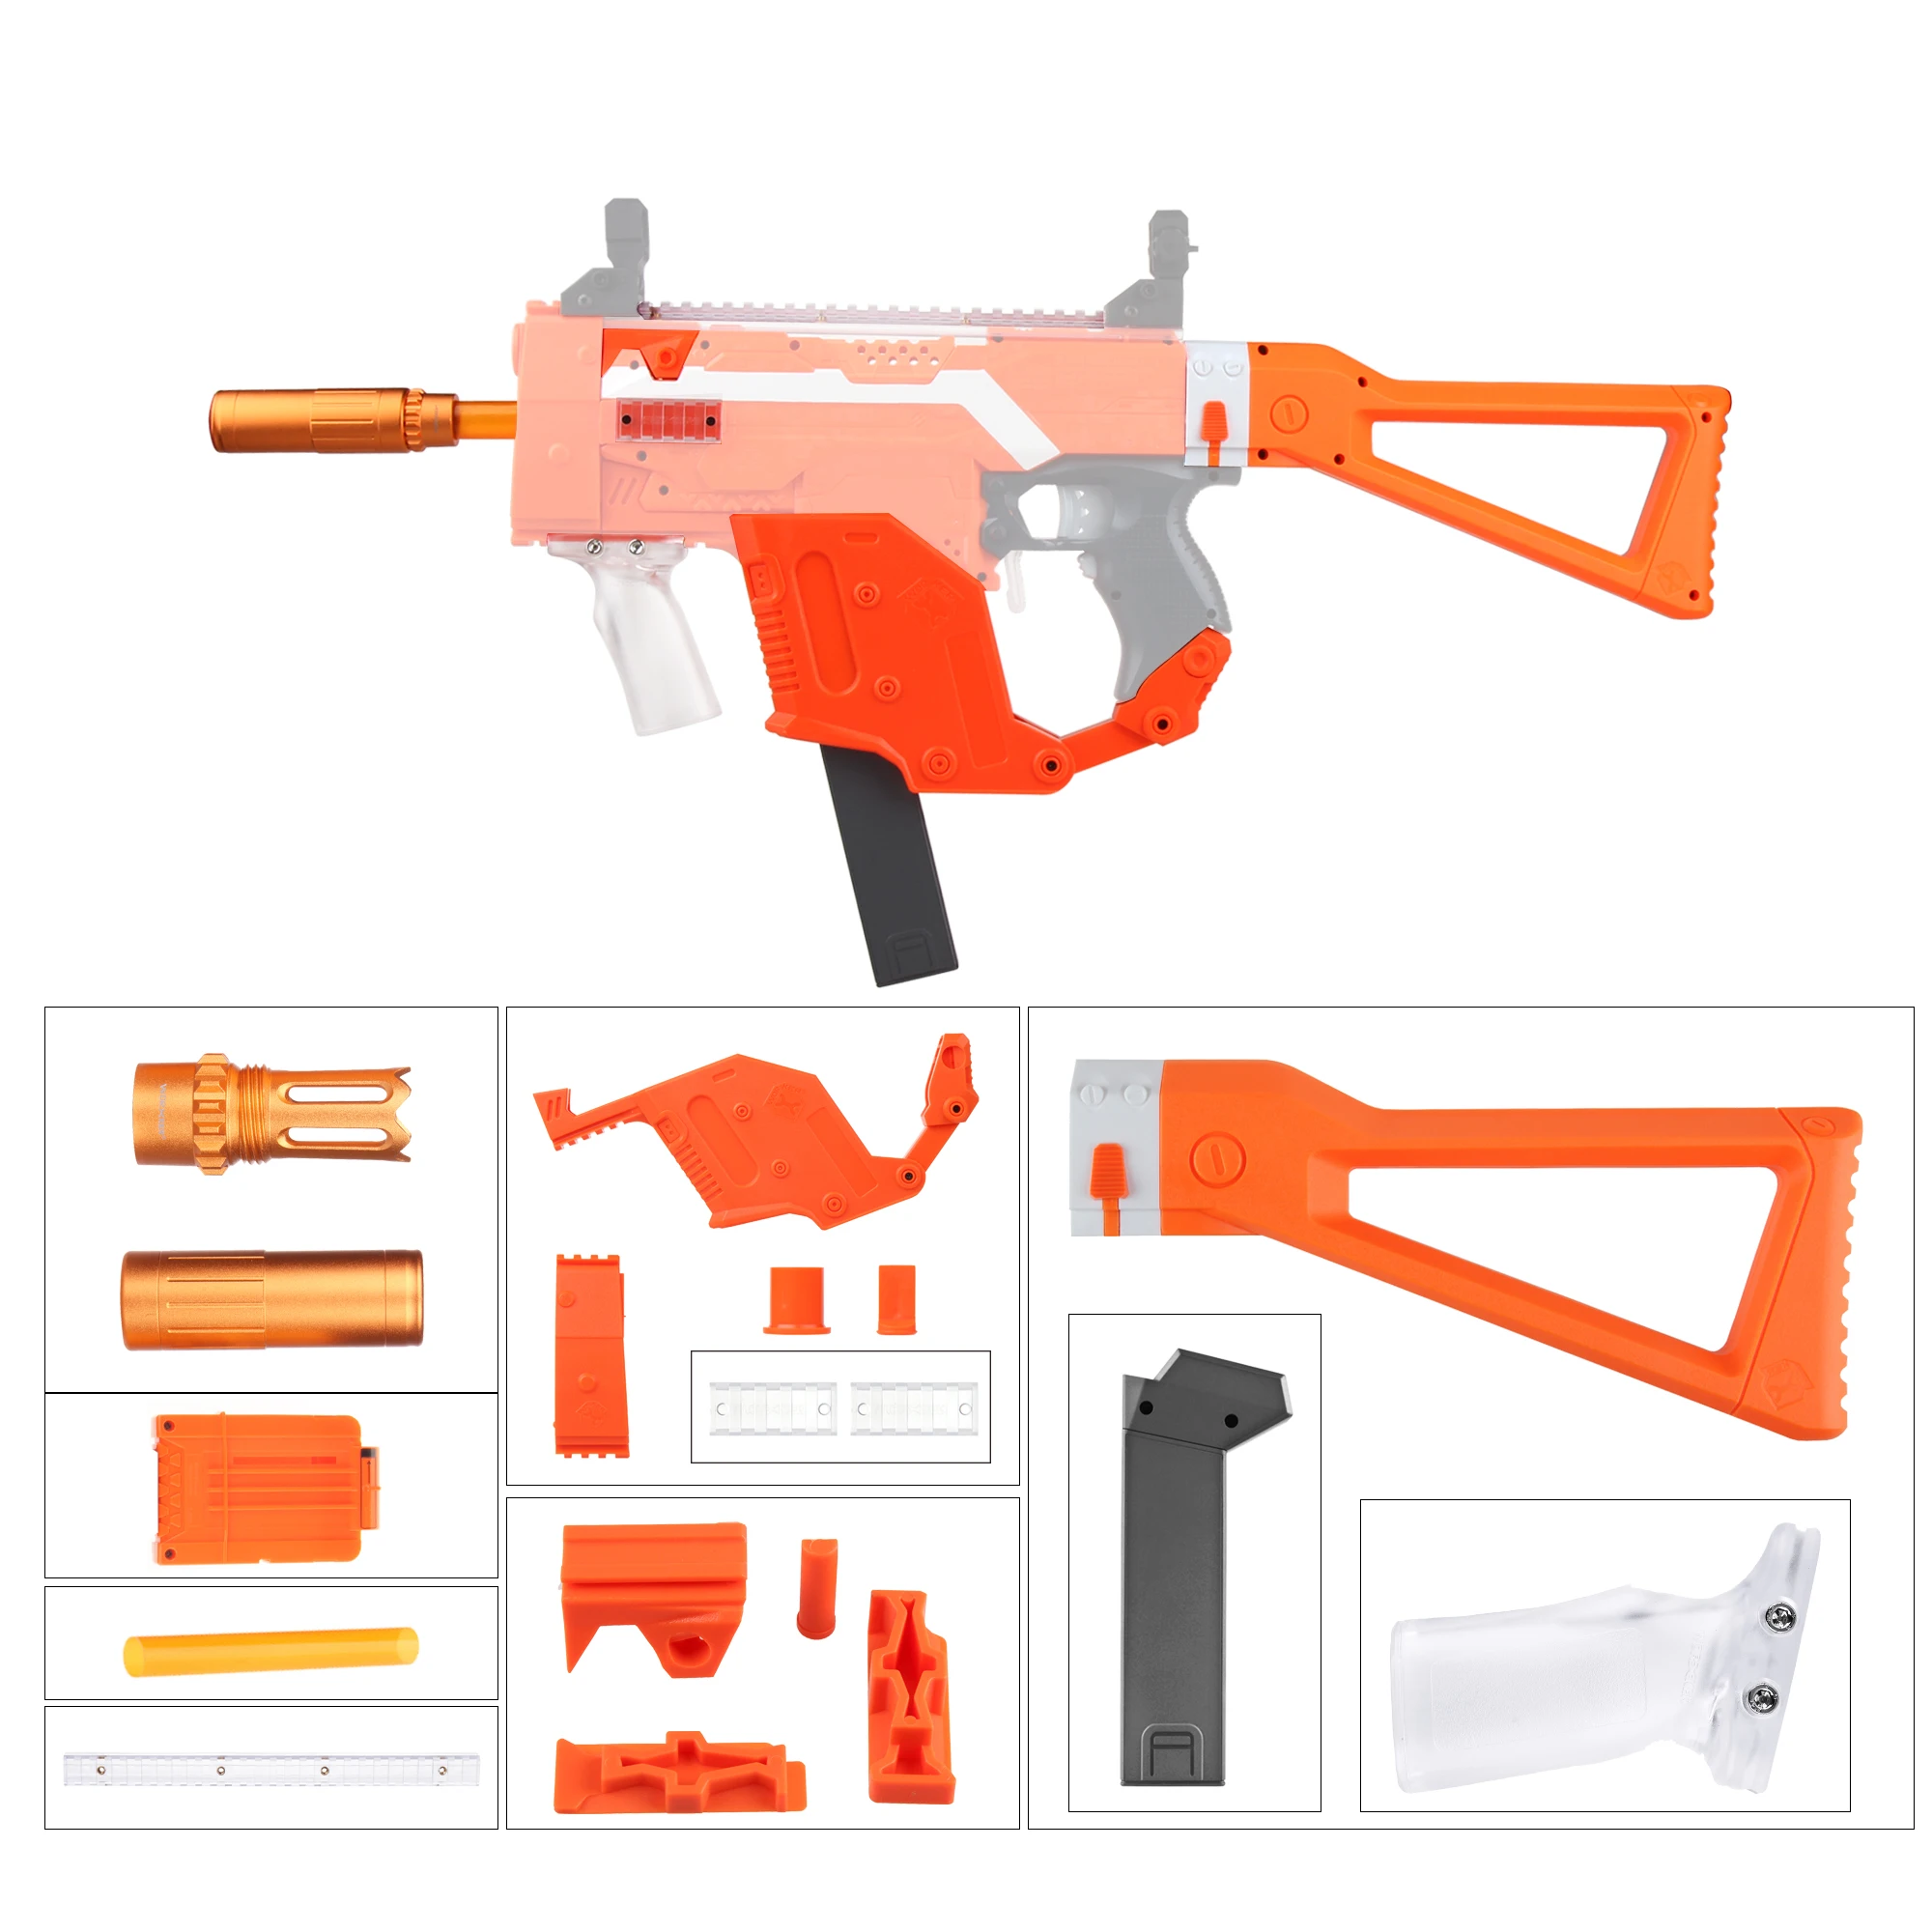 Worker Vector Kit Combo 12 Items Set For Nerf Toy Orange - Buy Toy Gun,Gun Toy,Toy Product Alibaba.com